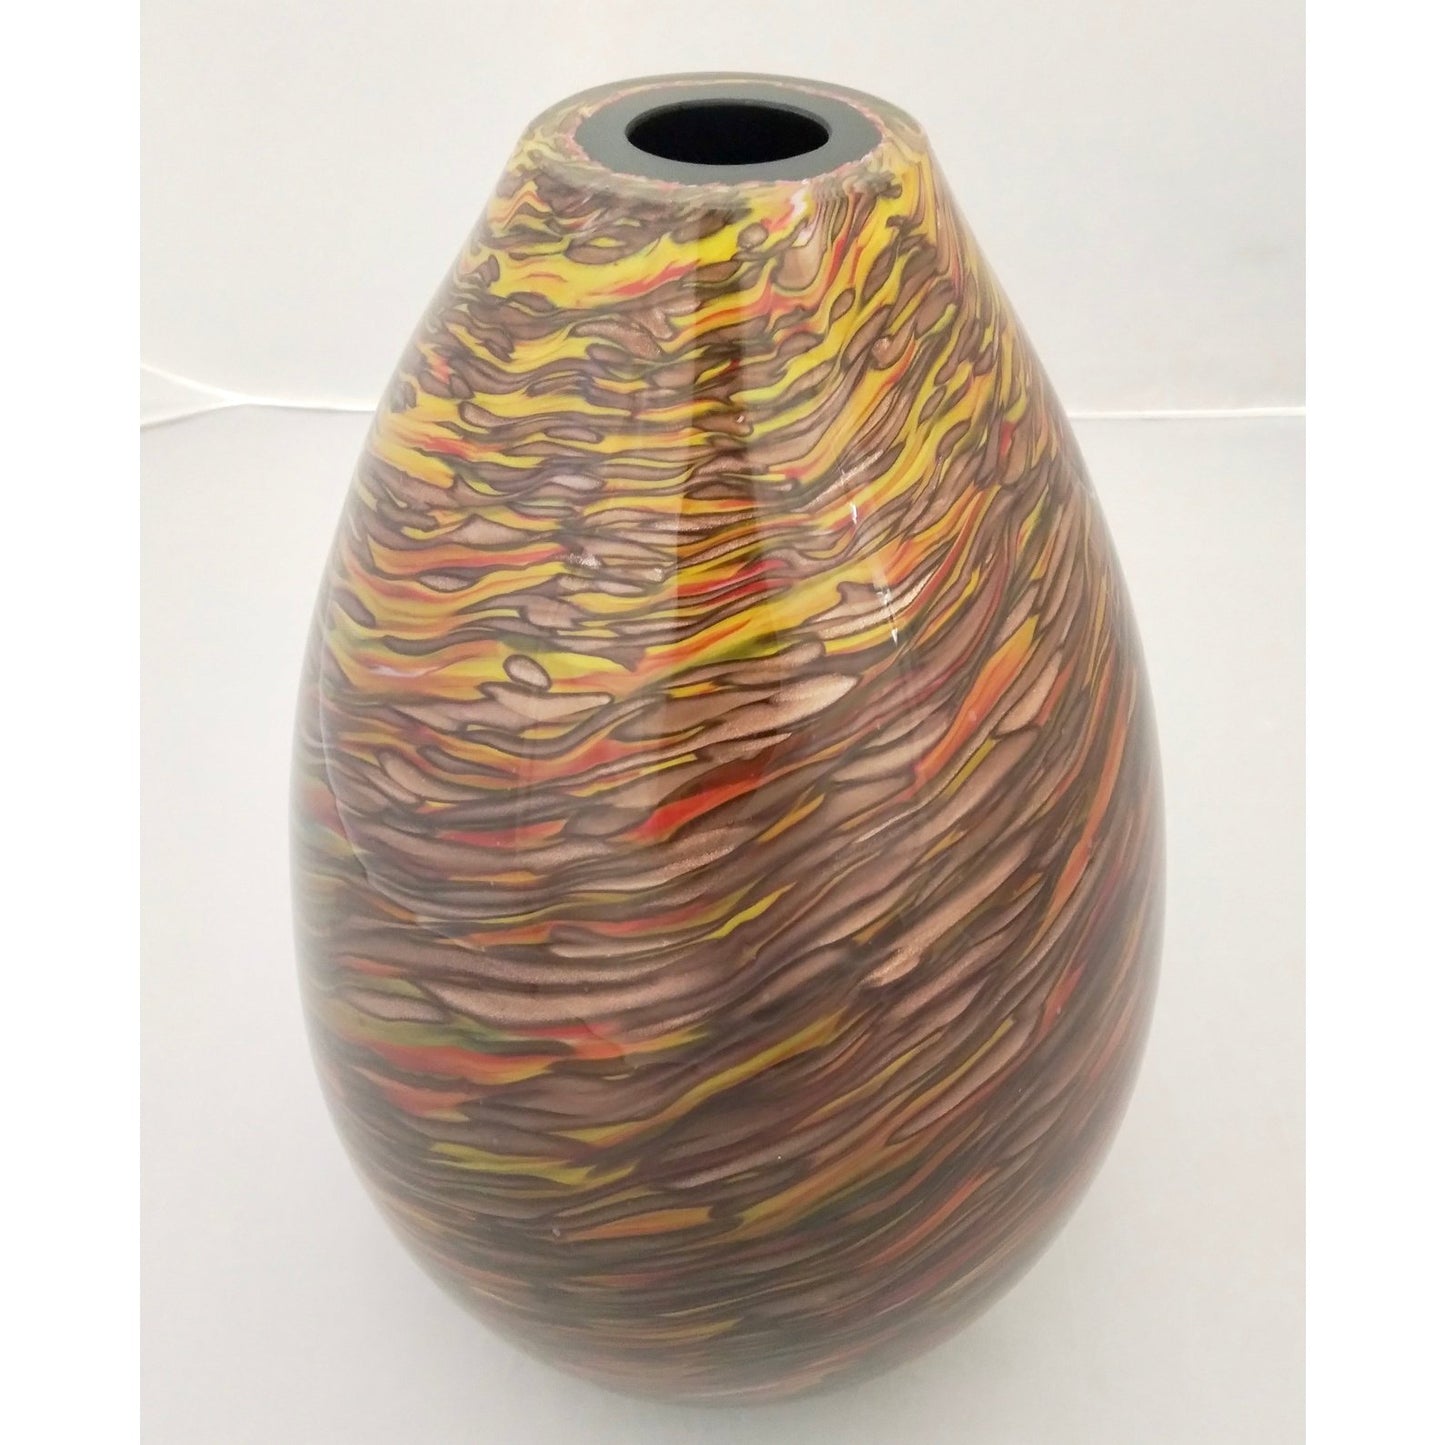 Formia 1980s Modern Ovoid Brown Yellow Red Orange Gold Murano Glass Vase